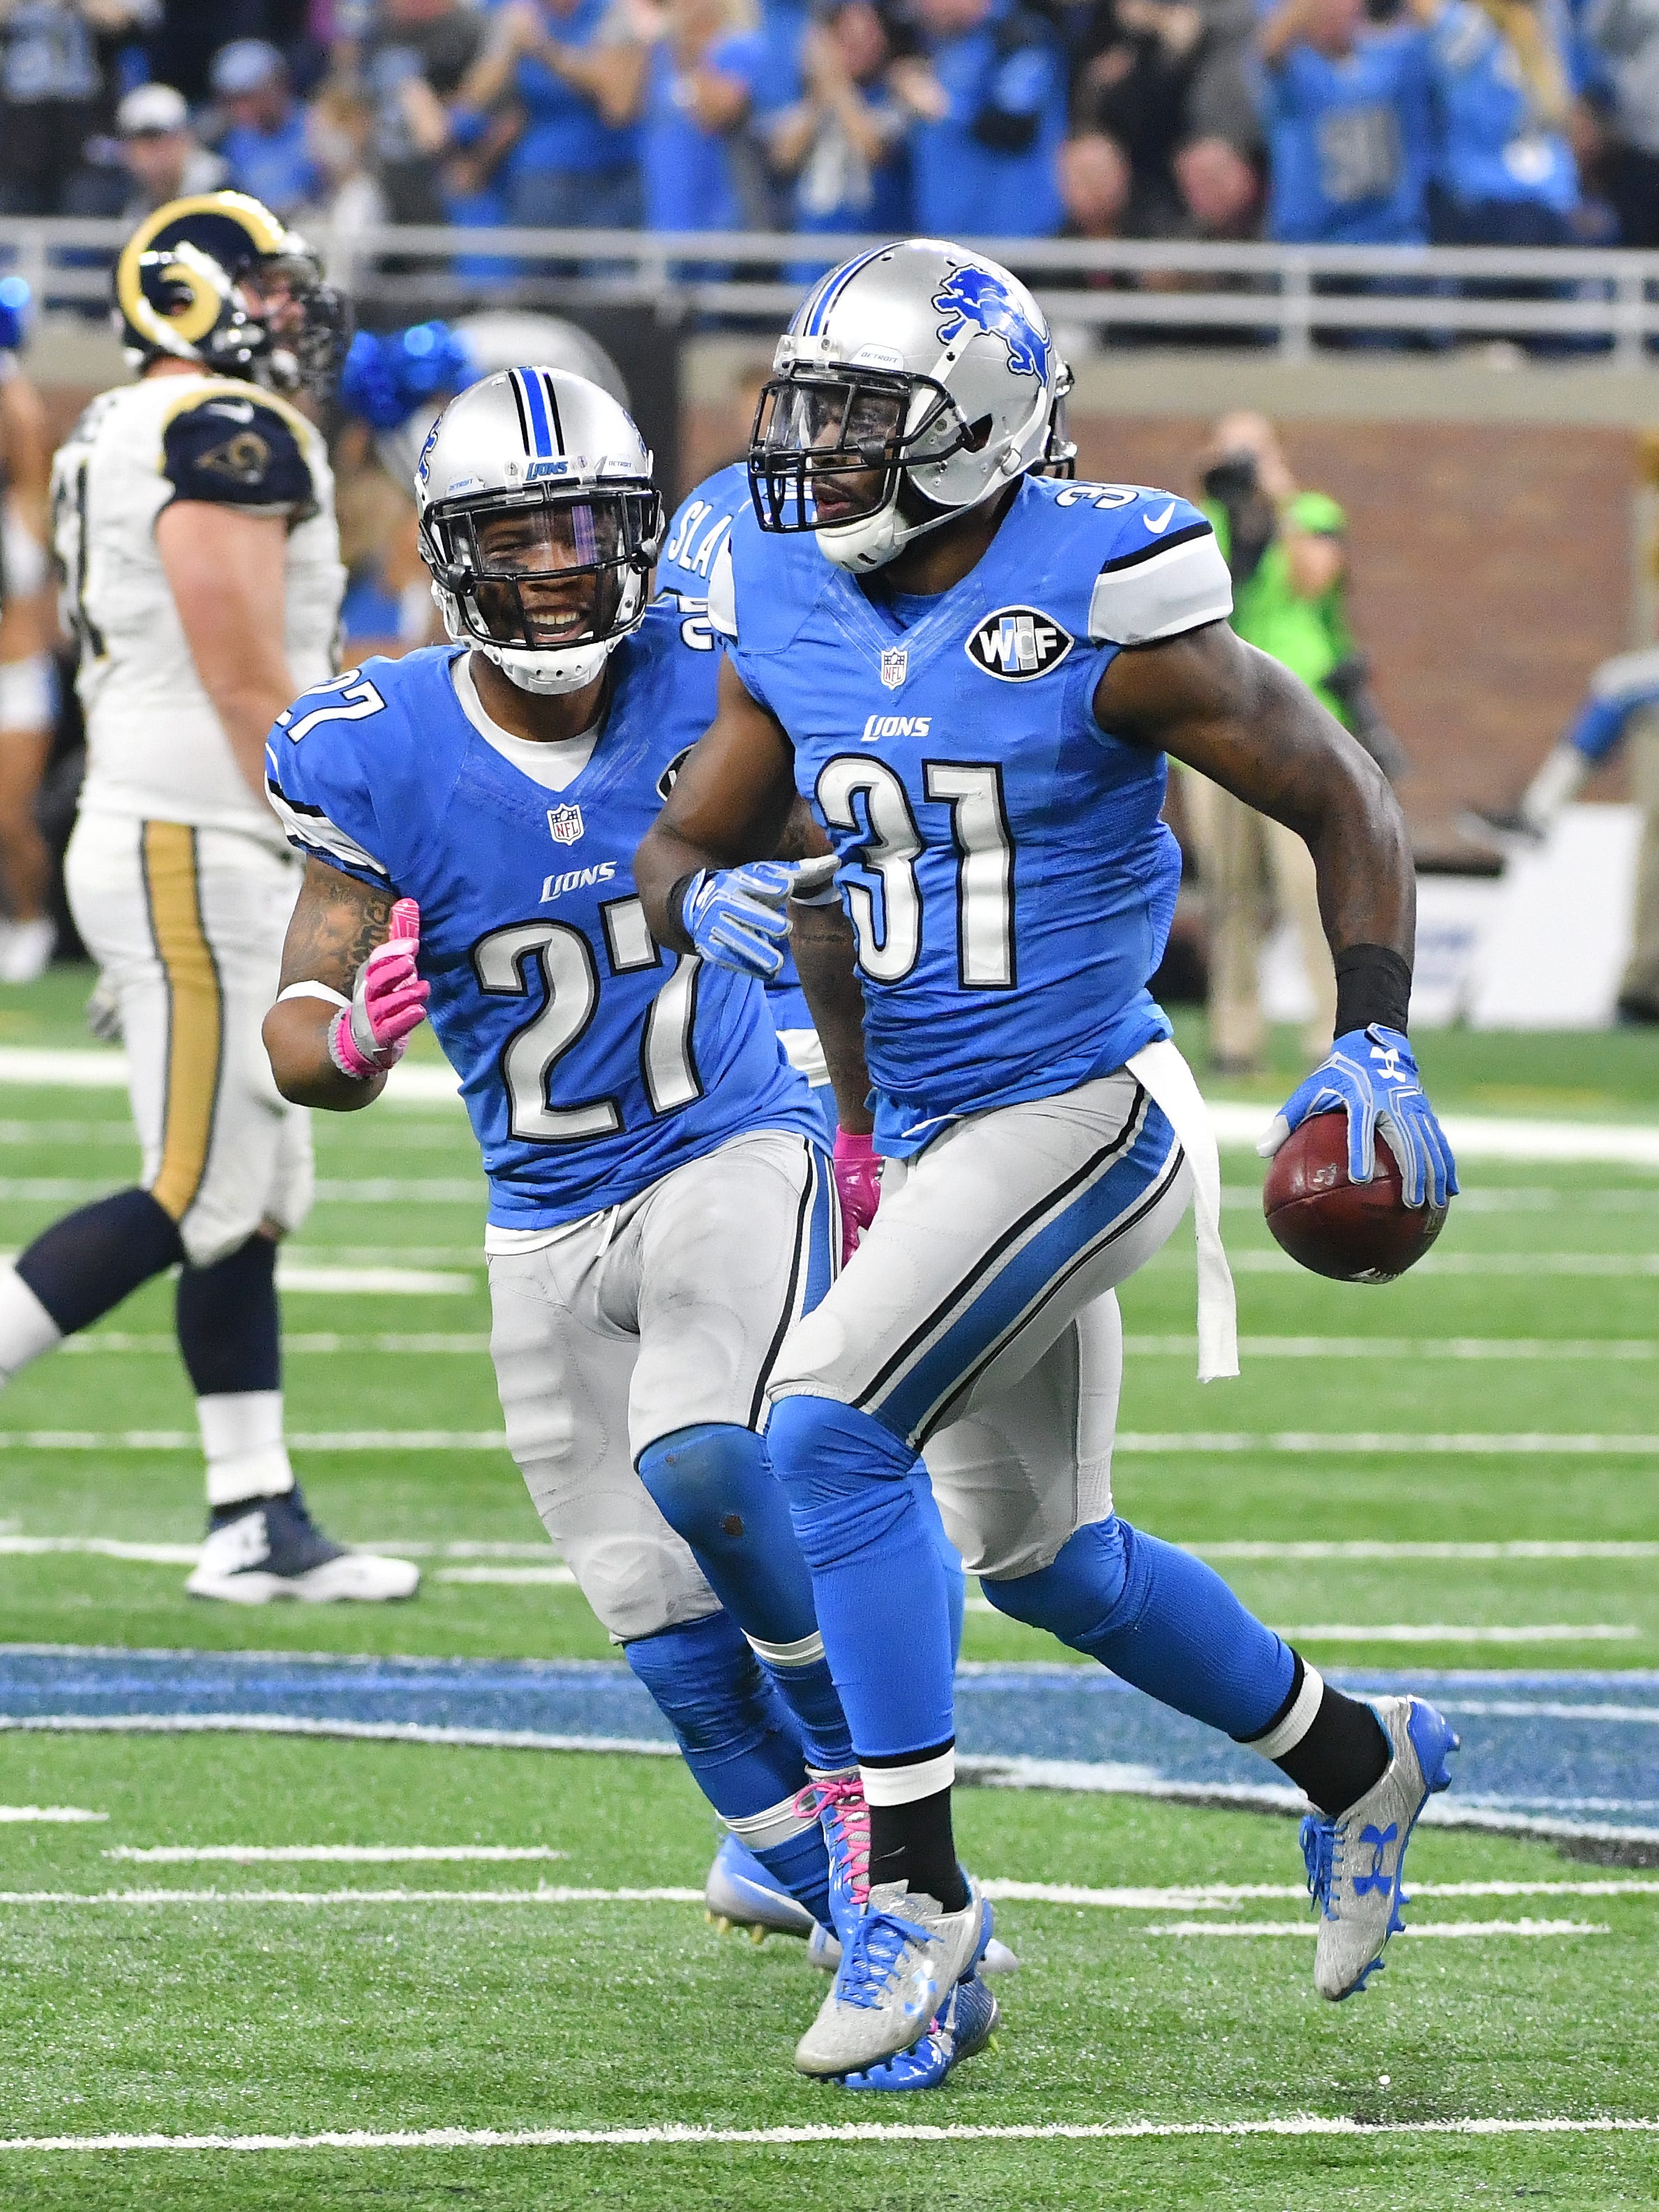 Lions safety Rafael Bush runs off the field with th ball after his late fourth quarter interception to seal Detroit's victory.